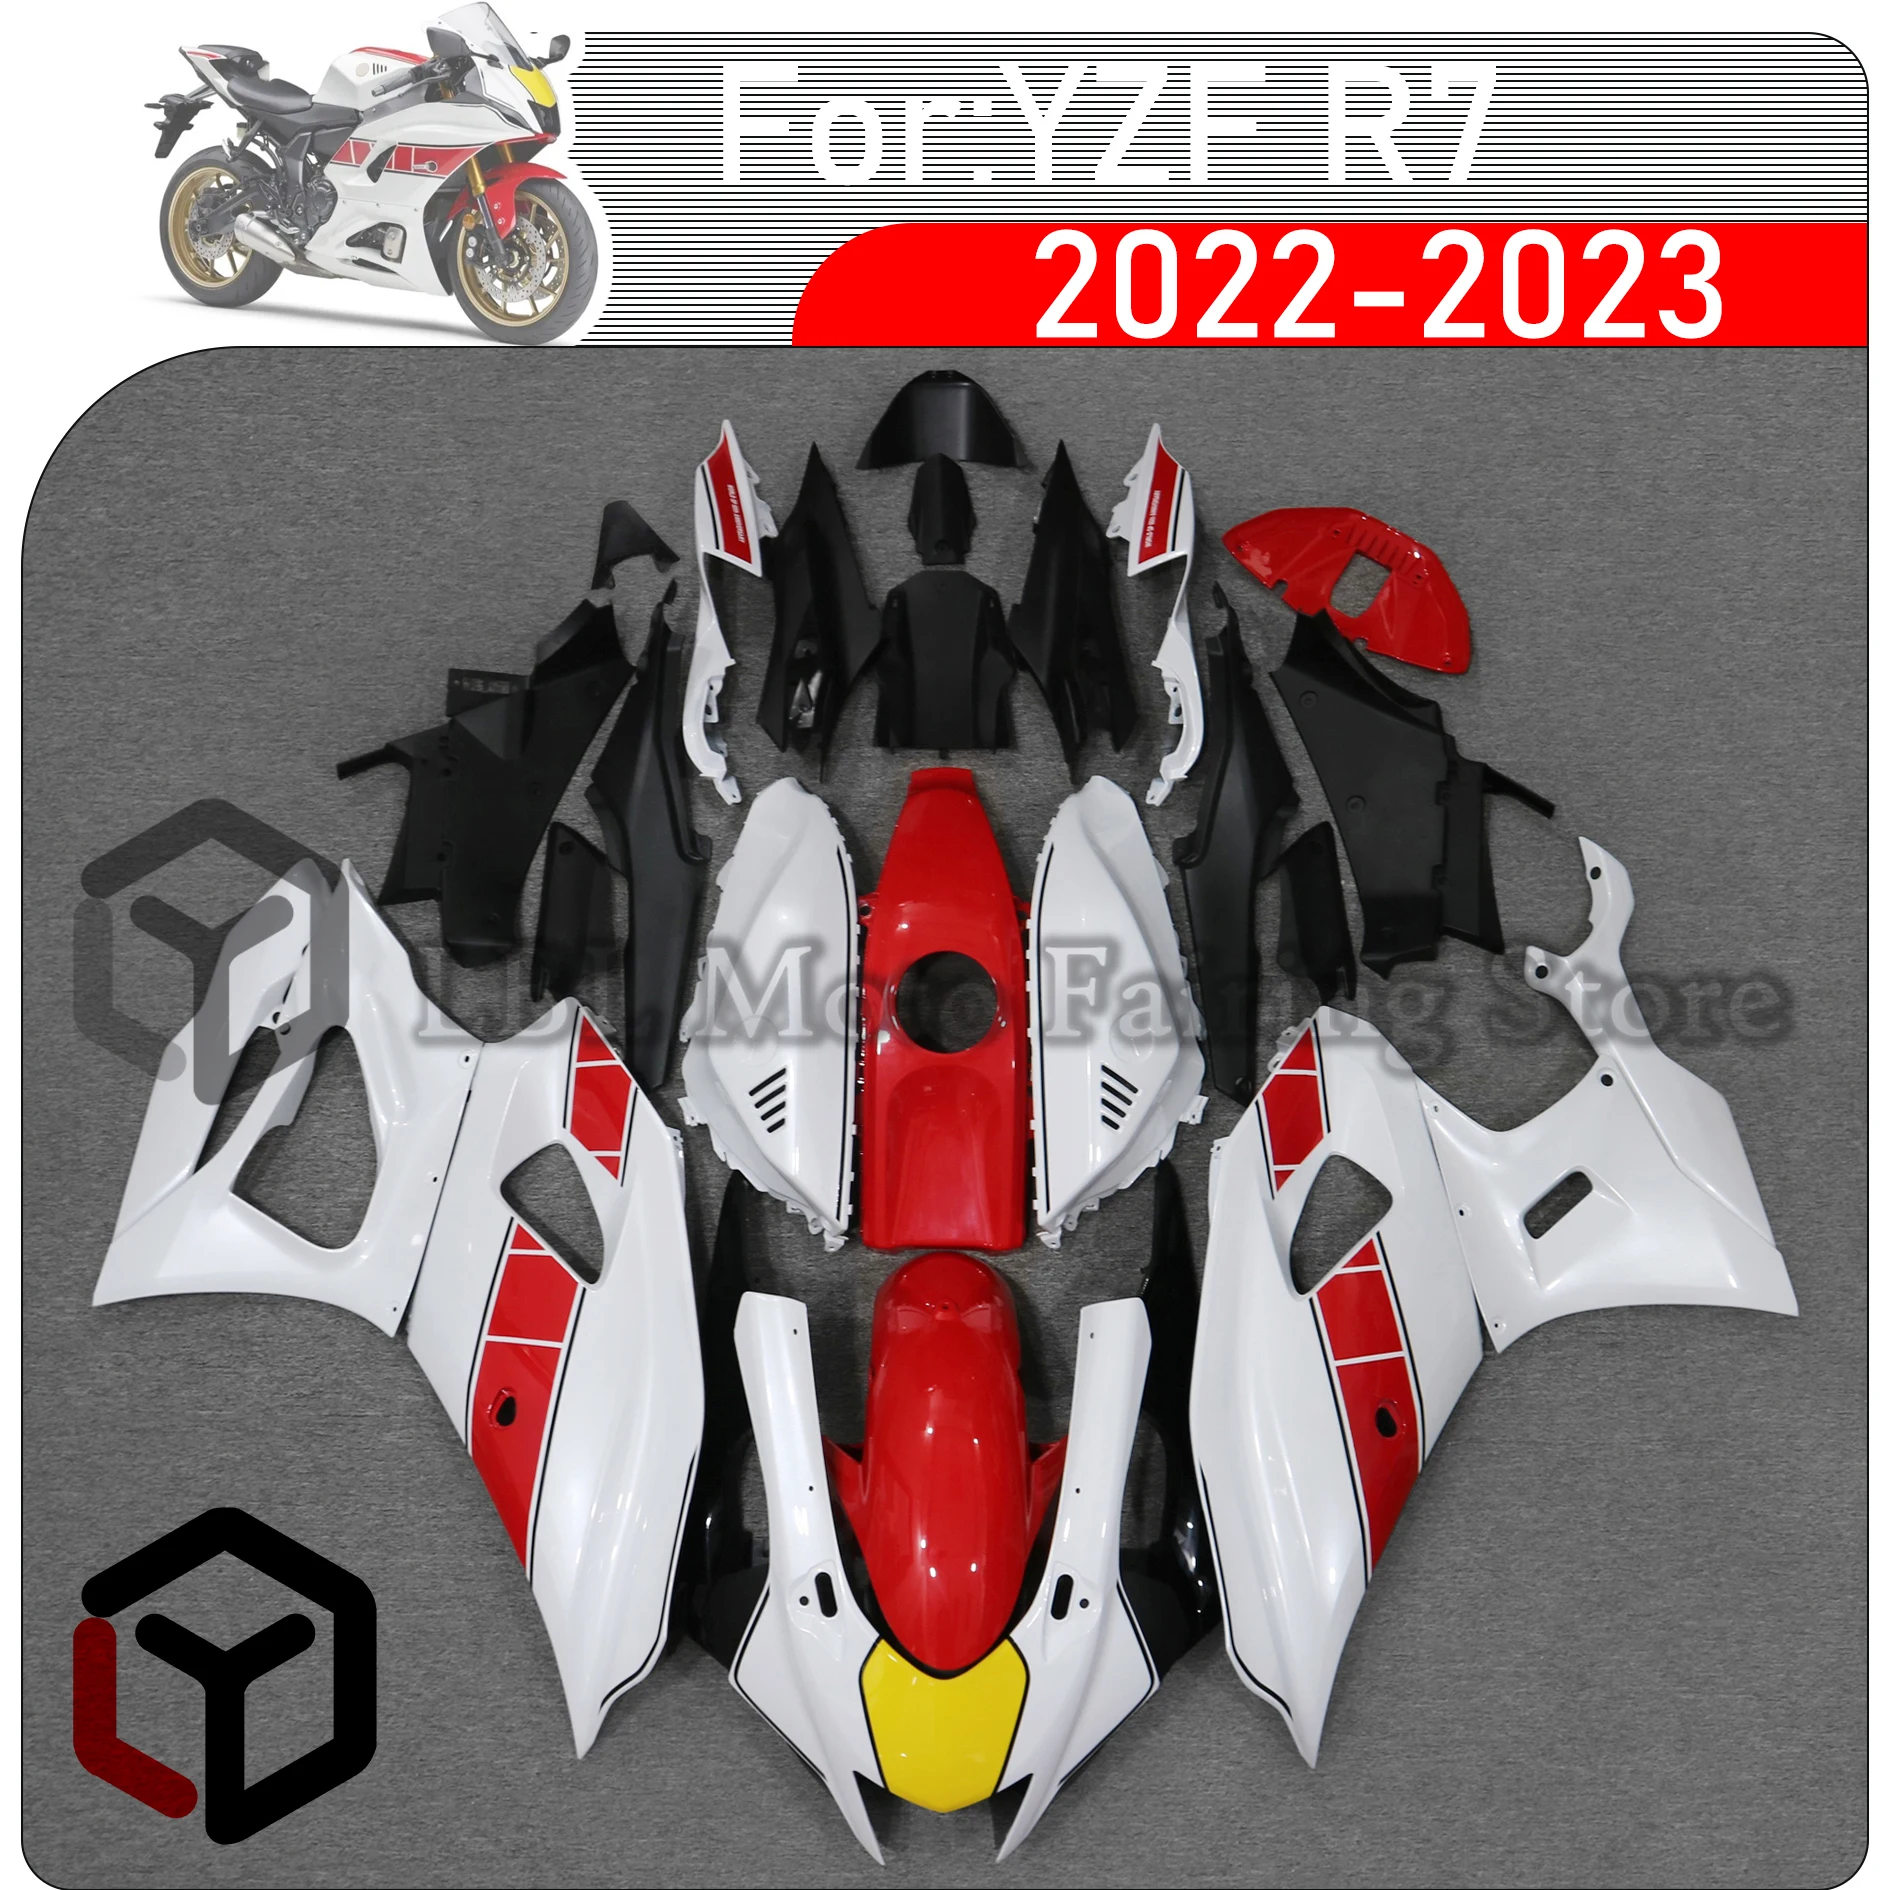 

Motorcycle ABS Injection Bodywork Fairing Kit For YAMAHA YZF700 YZF R7 YZFR7 2022 2023 Motorcycle Shell Fairing Spoiler Bodywork